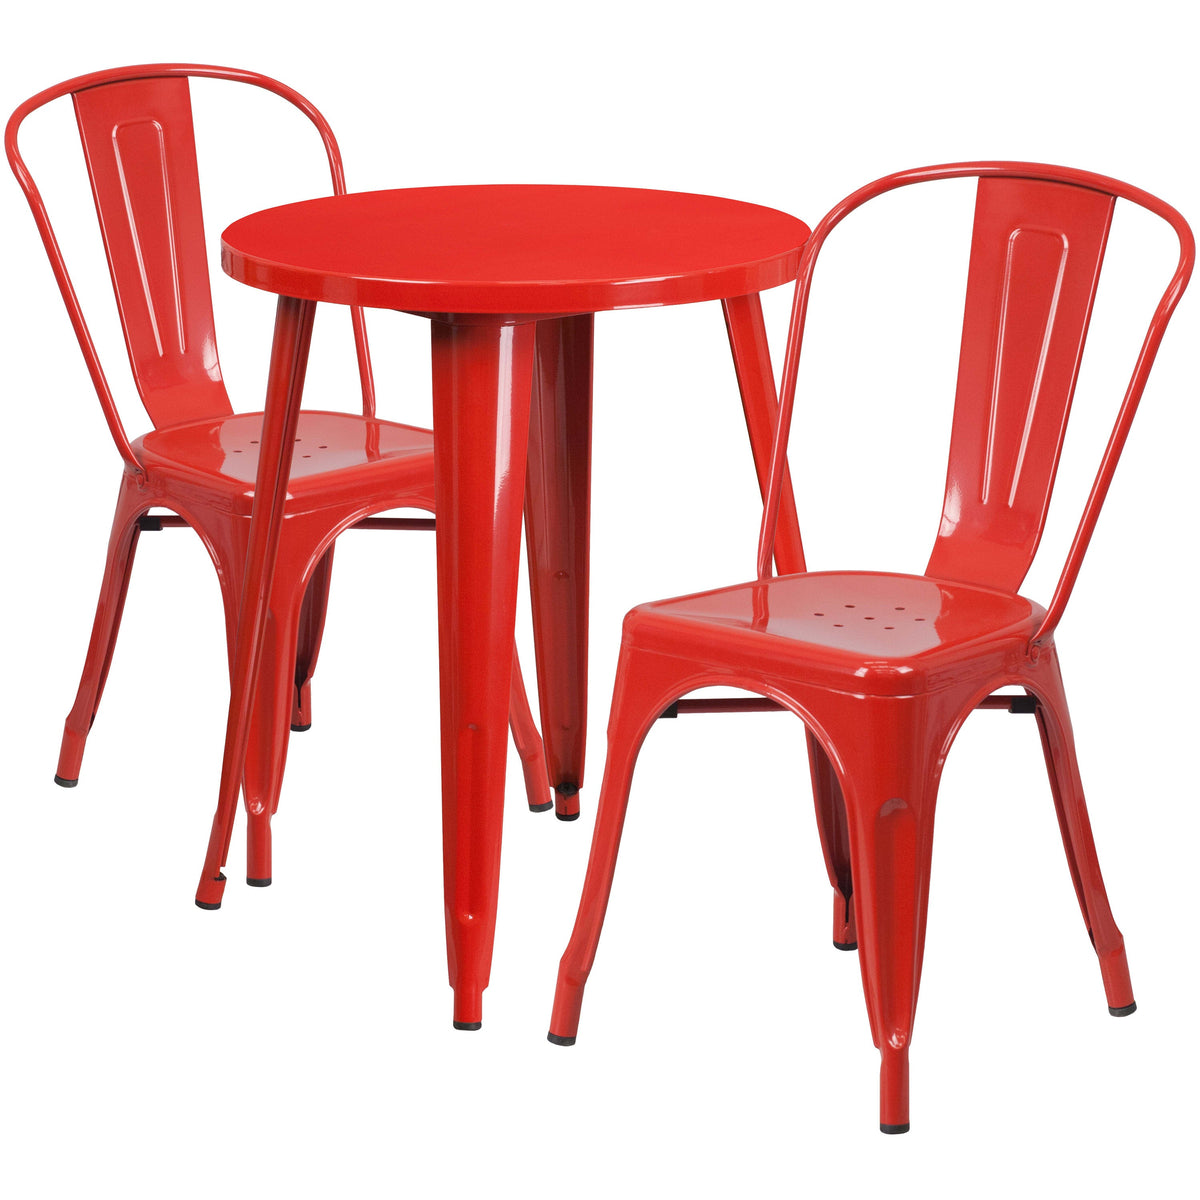 Red |#| 24inch Round Red Metal Indoor-Outdoor Table Set with 2 Cafe Chairs - Patio Set